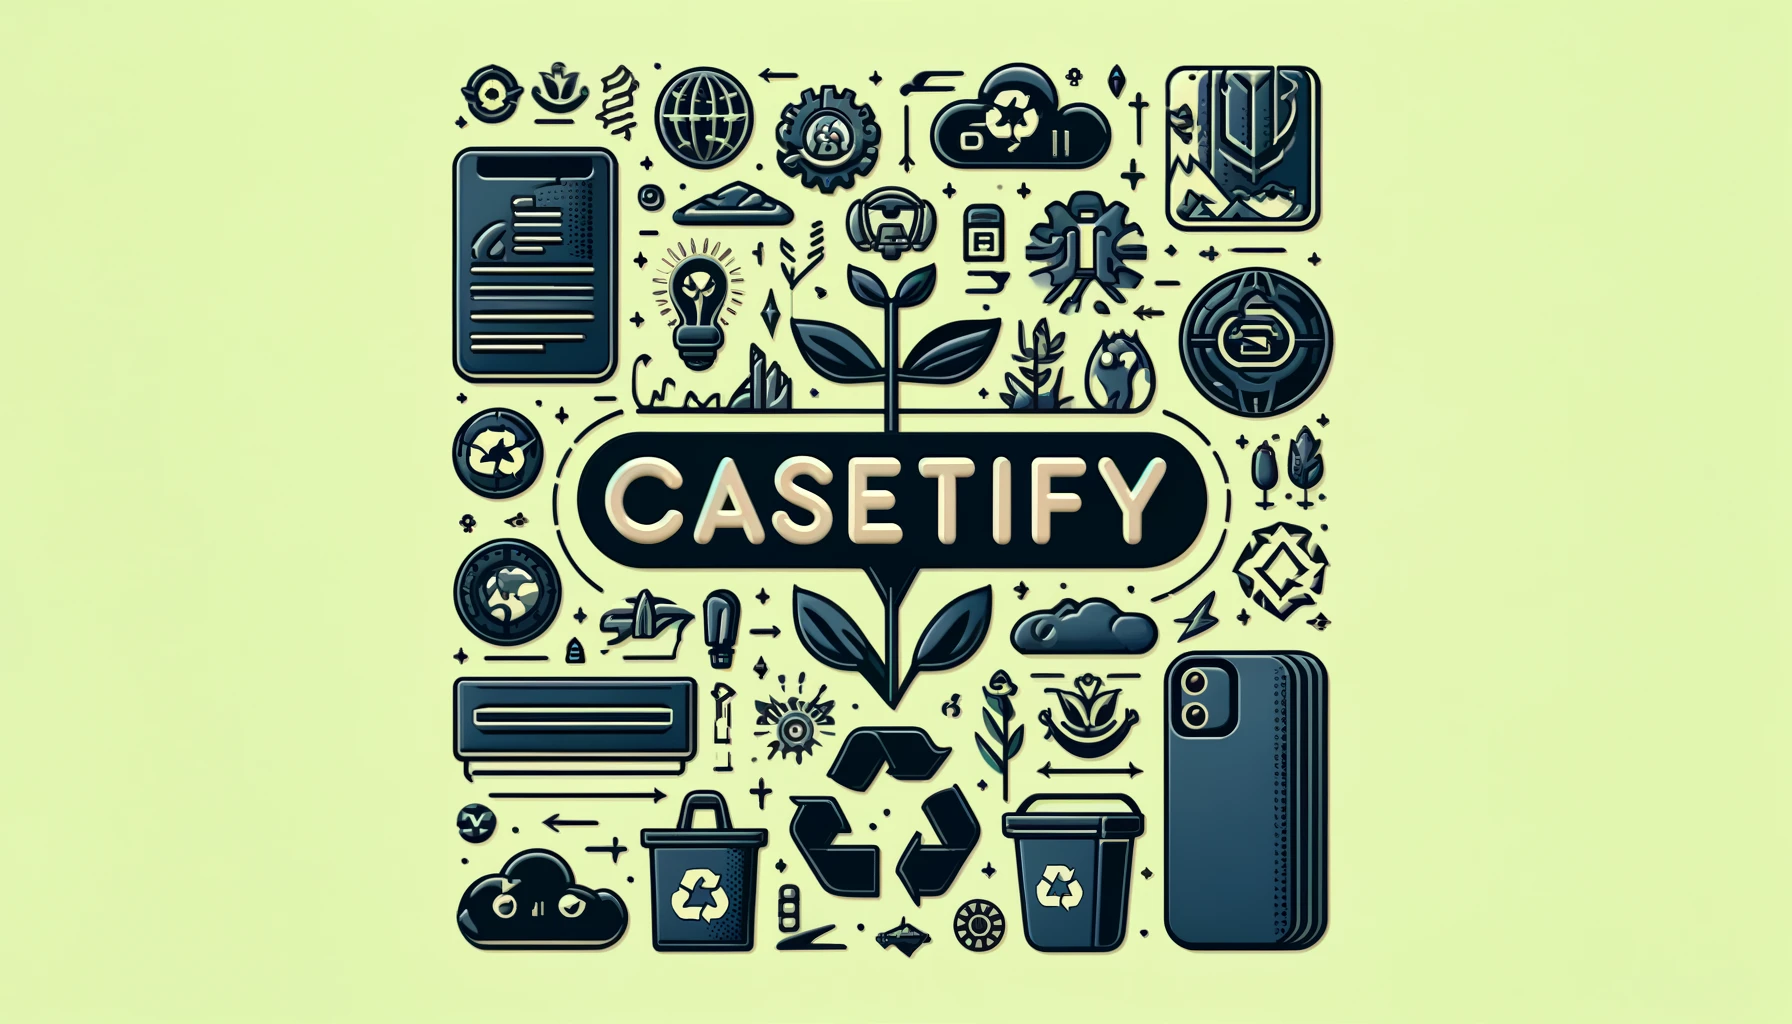 An image highlighting CASETiFY's sustainable strategies. Include elements such as eco-friendly materials, recycling symbols, and green initiatives. The word 'CASETiFY' should be clearly visible.